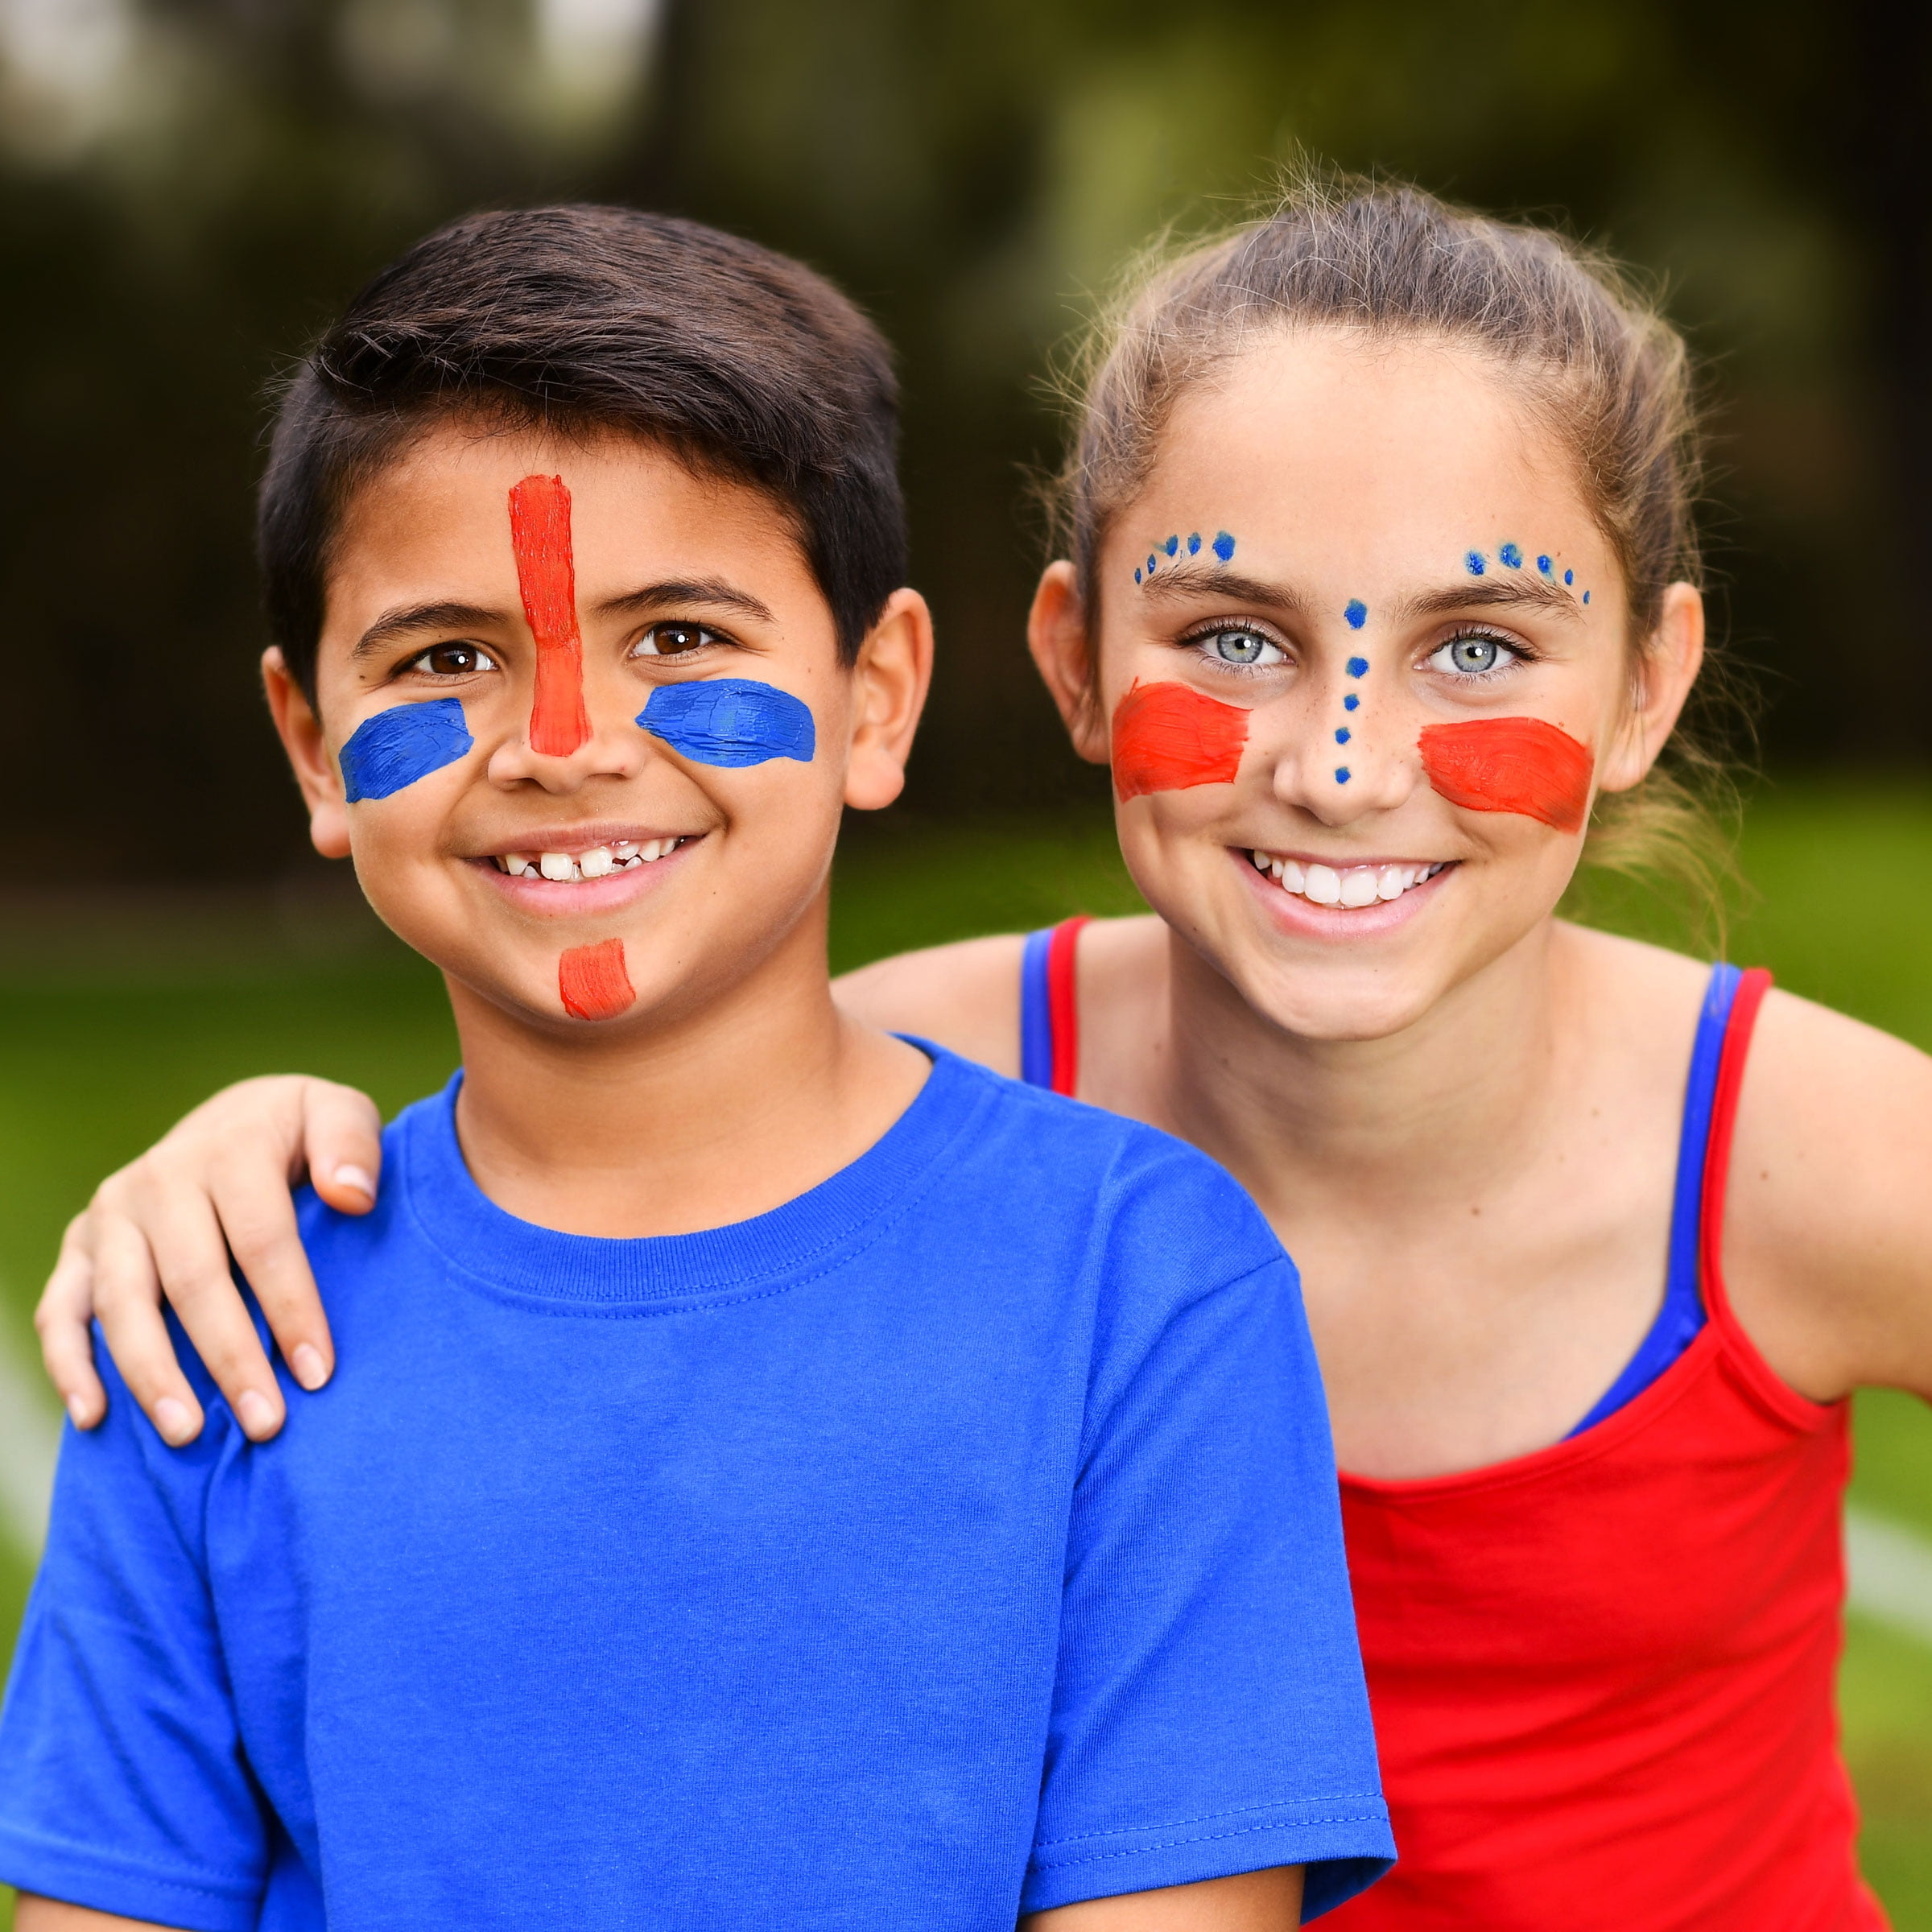 Maydear Face Paint Kit for Kids, 10 Color Safe and Non-Toxic Face